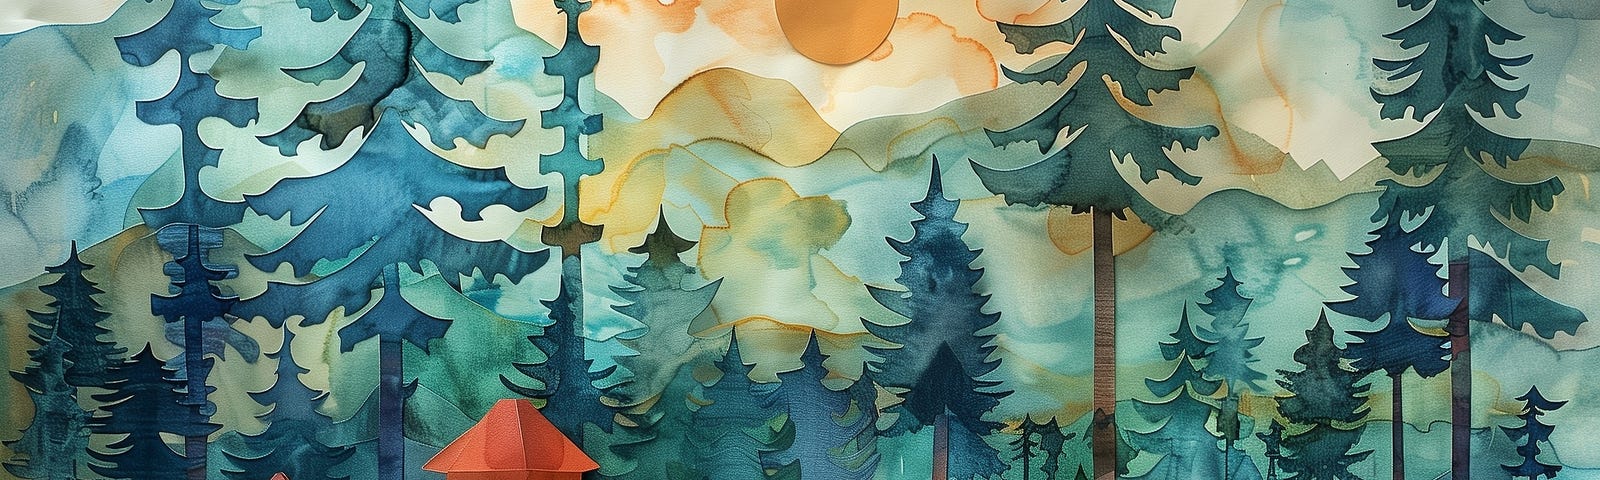 Paper cut out illustration of a playground in the trees with sunny sky over top.